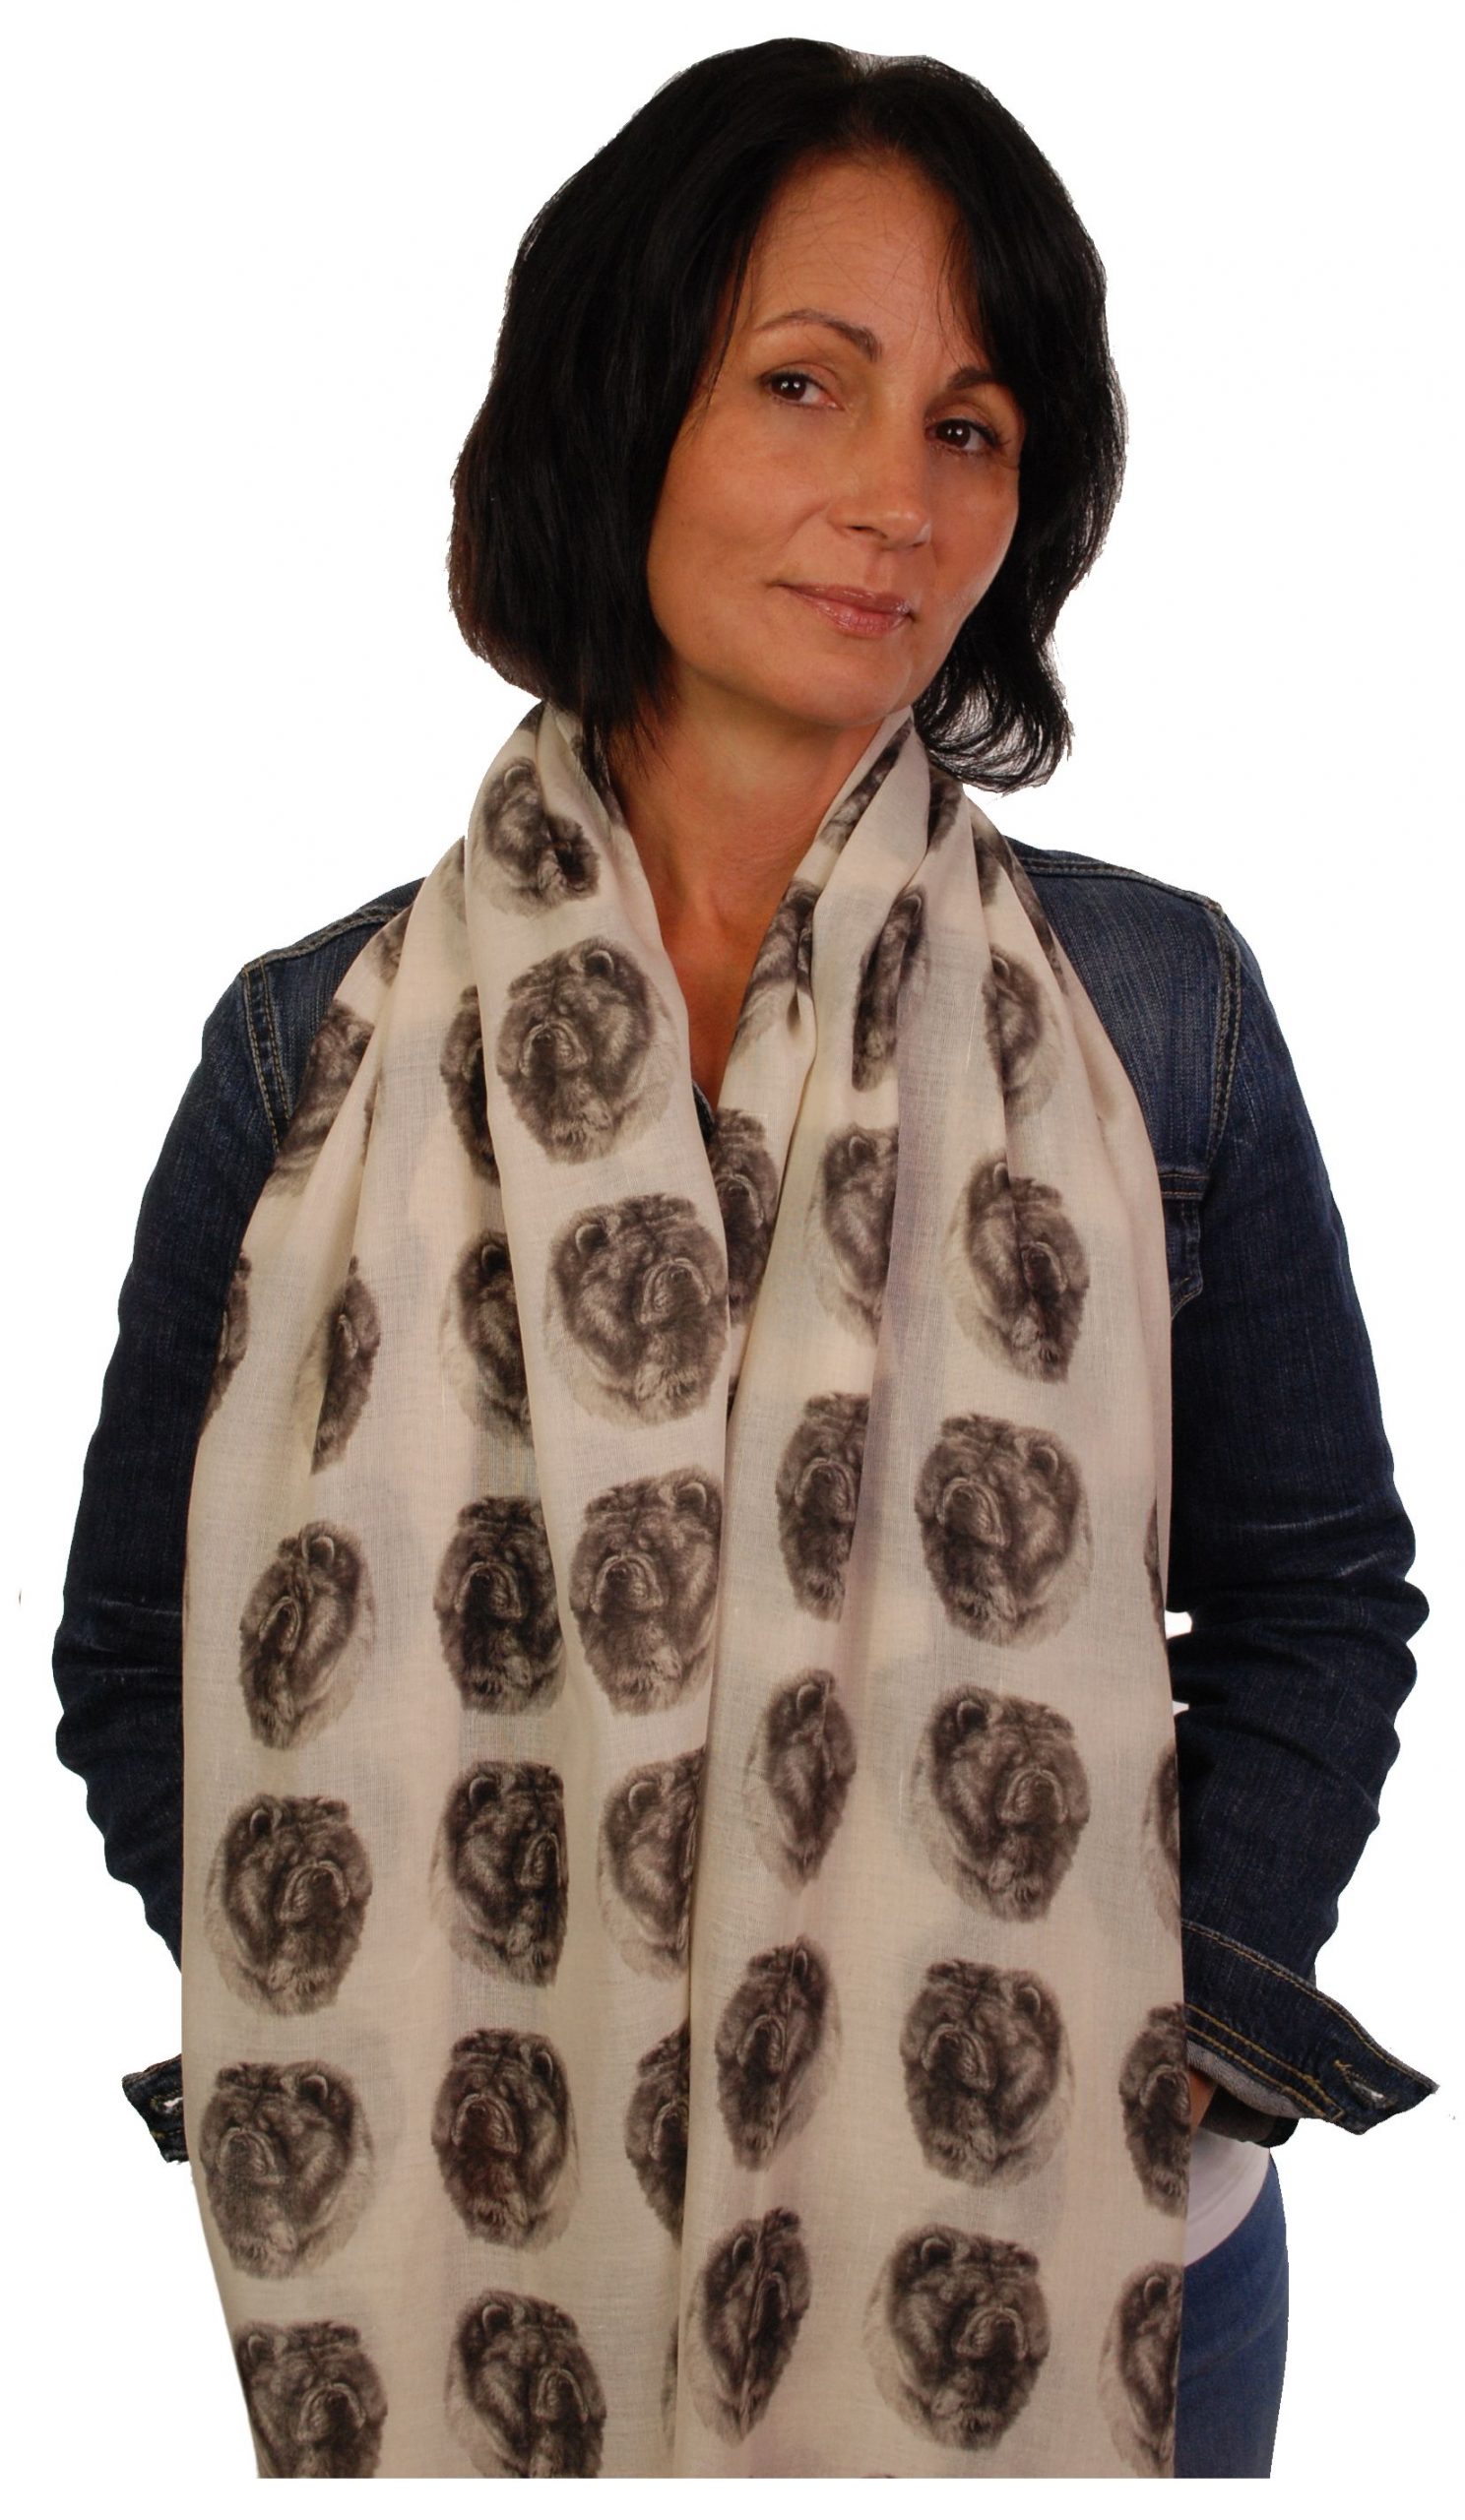 Mike Sibley Chow Chow licensed design ladies fashion scarf